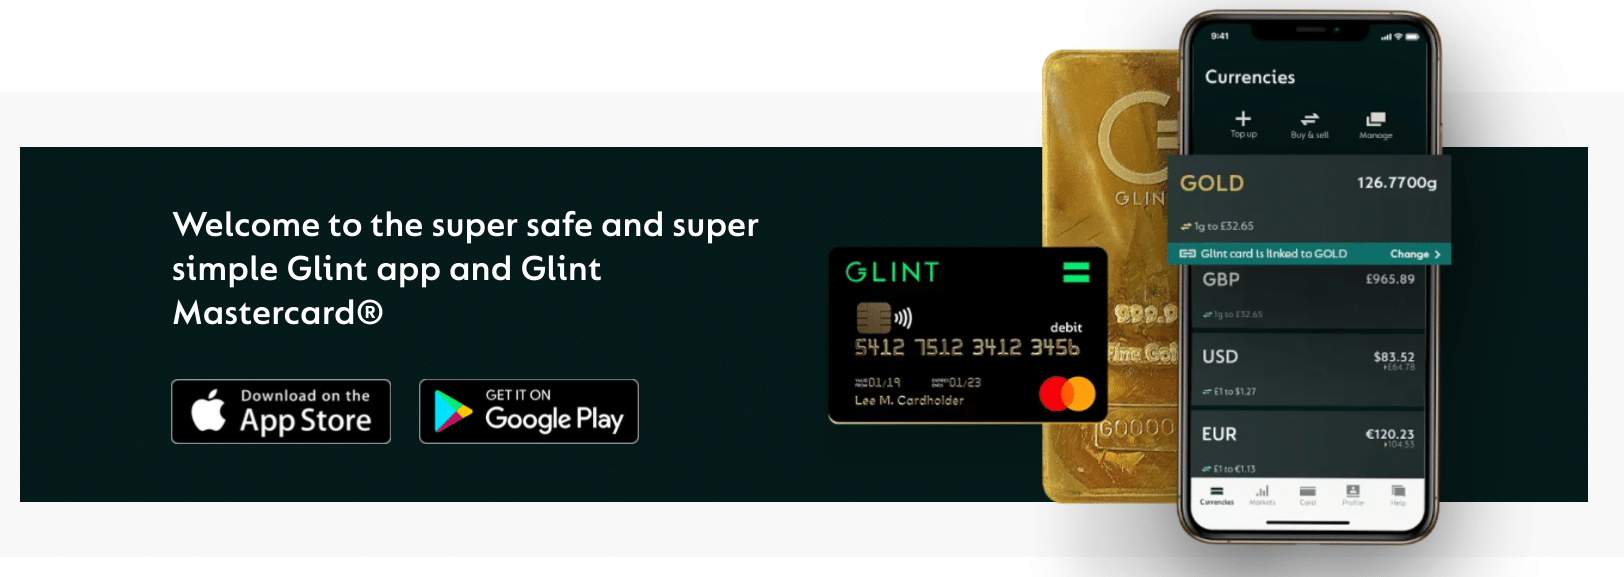 Glint review: how to buy gold via an app